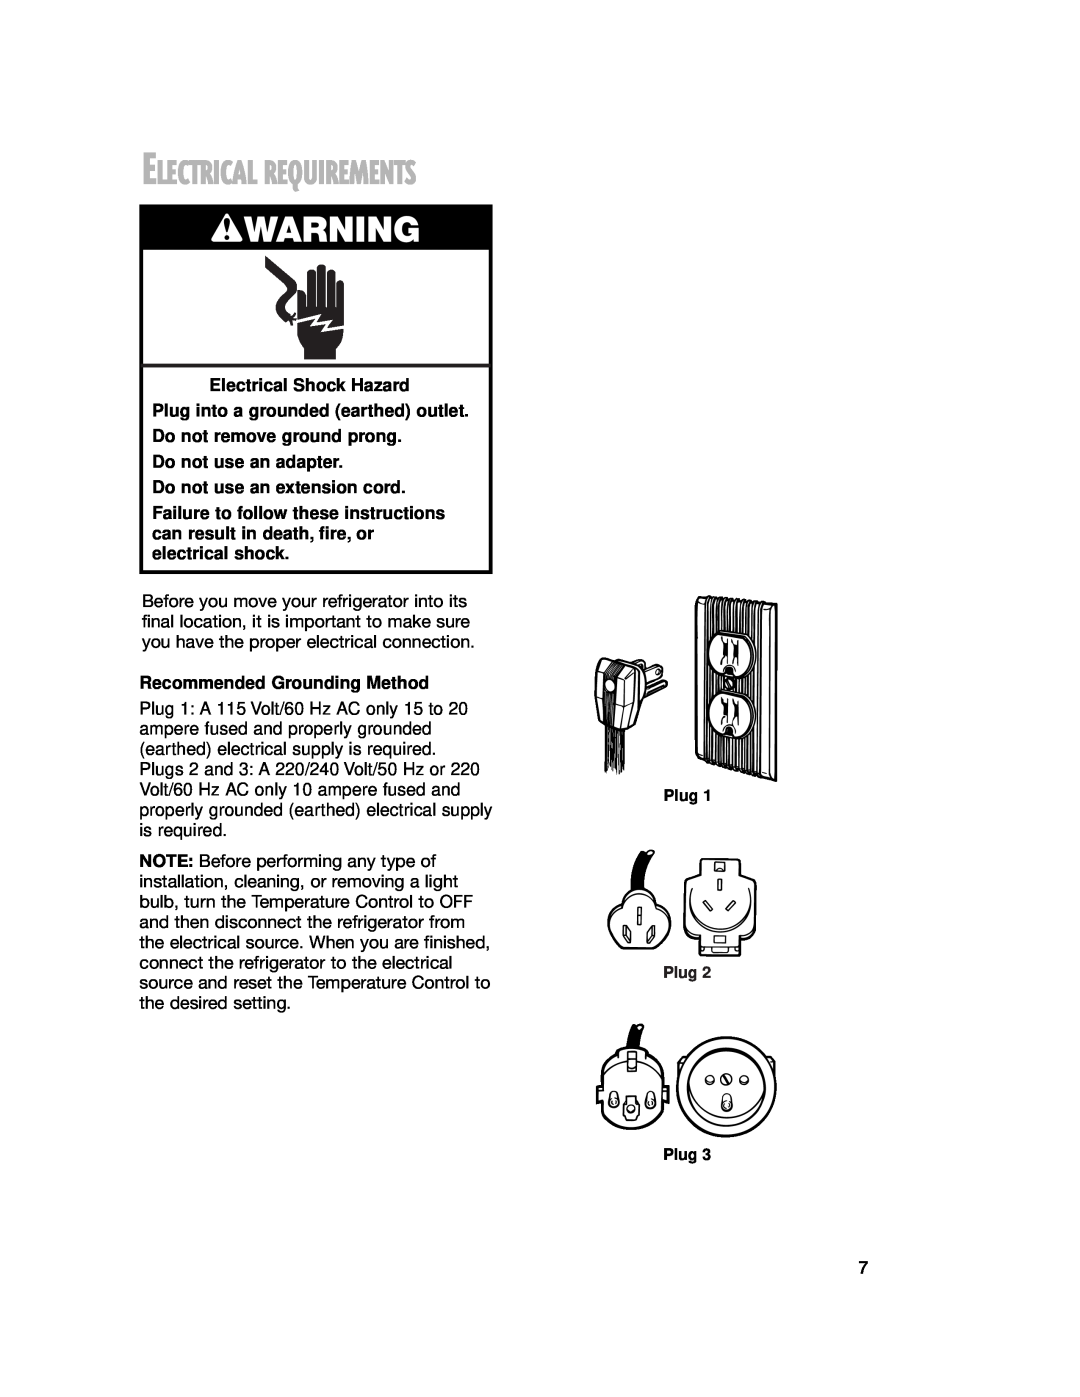 Whirlpool 2201959 manual Electrical Requirements, wWARNING, Electrical Shock Hazard Plug into a grounded earthed outlet 